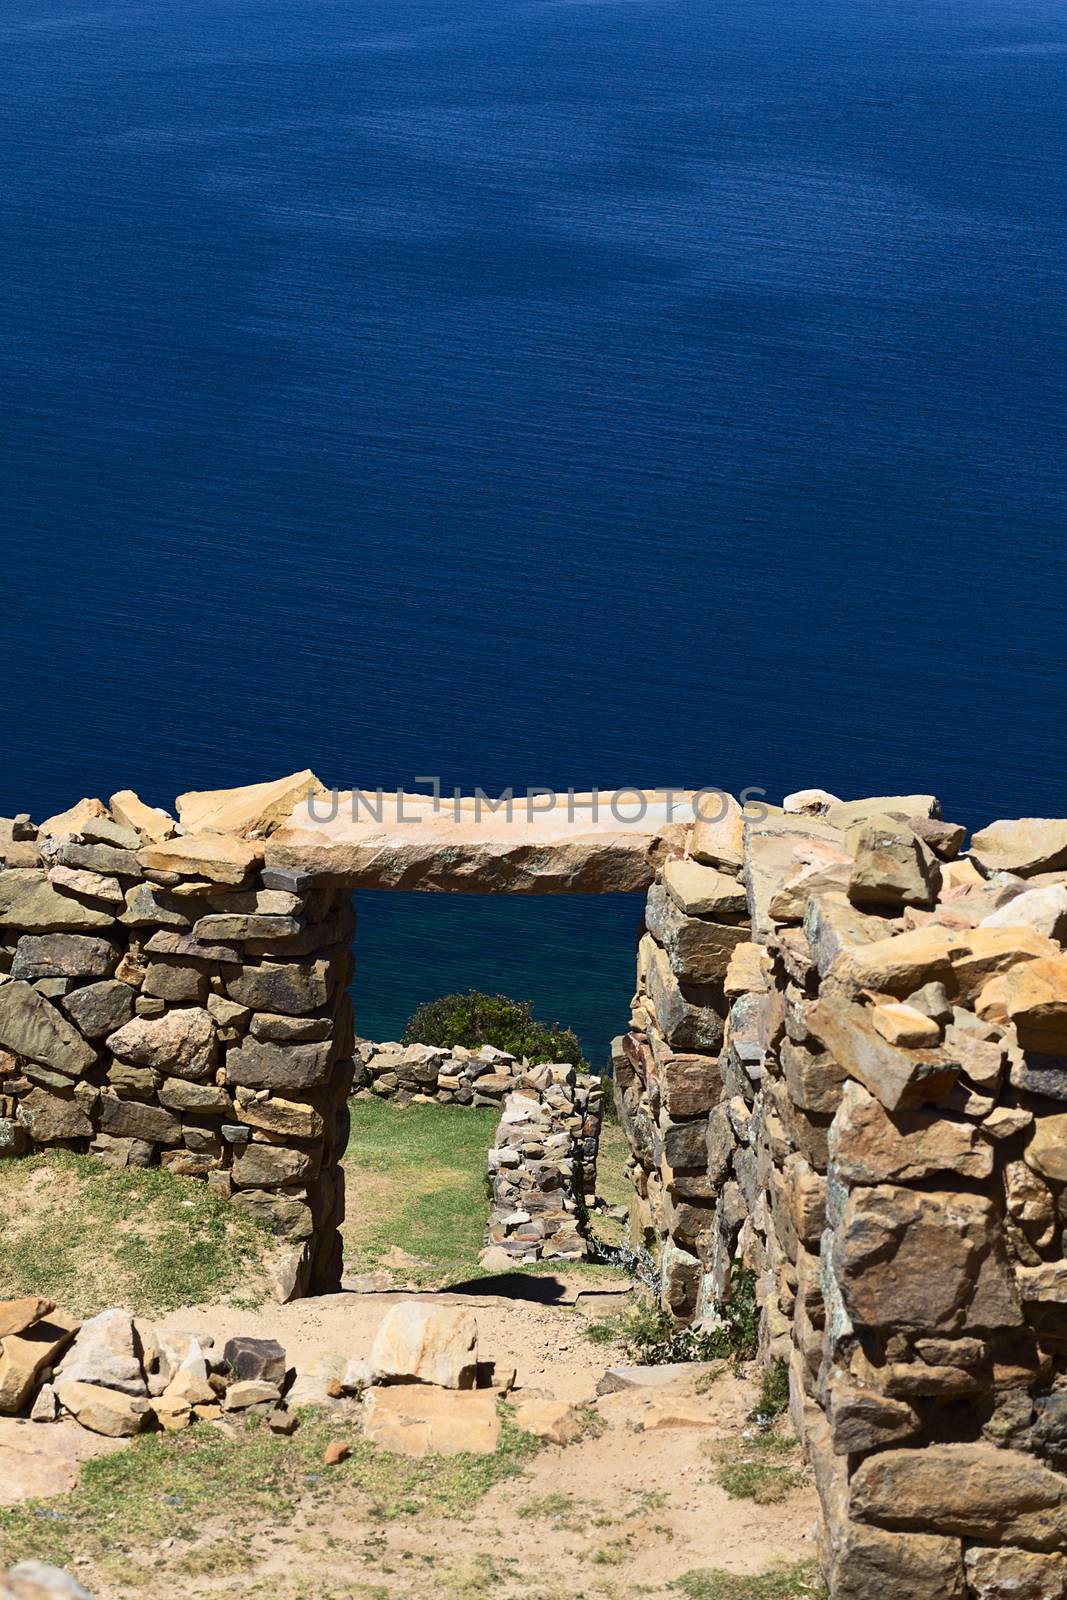 View through a door frame of the Chinkana archeological site of Tiwanaku (Tiahuanaco) origin on the Northwestern part of the Isla del Sol (Island of the Sun) in Lake Titicaca in Bolivia. Isla del Sol is a popular tourist destination and is reachable by boat from Copacabana, Bolivia. (Selective Focus, Focus on the door frame and beyond)